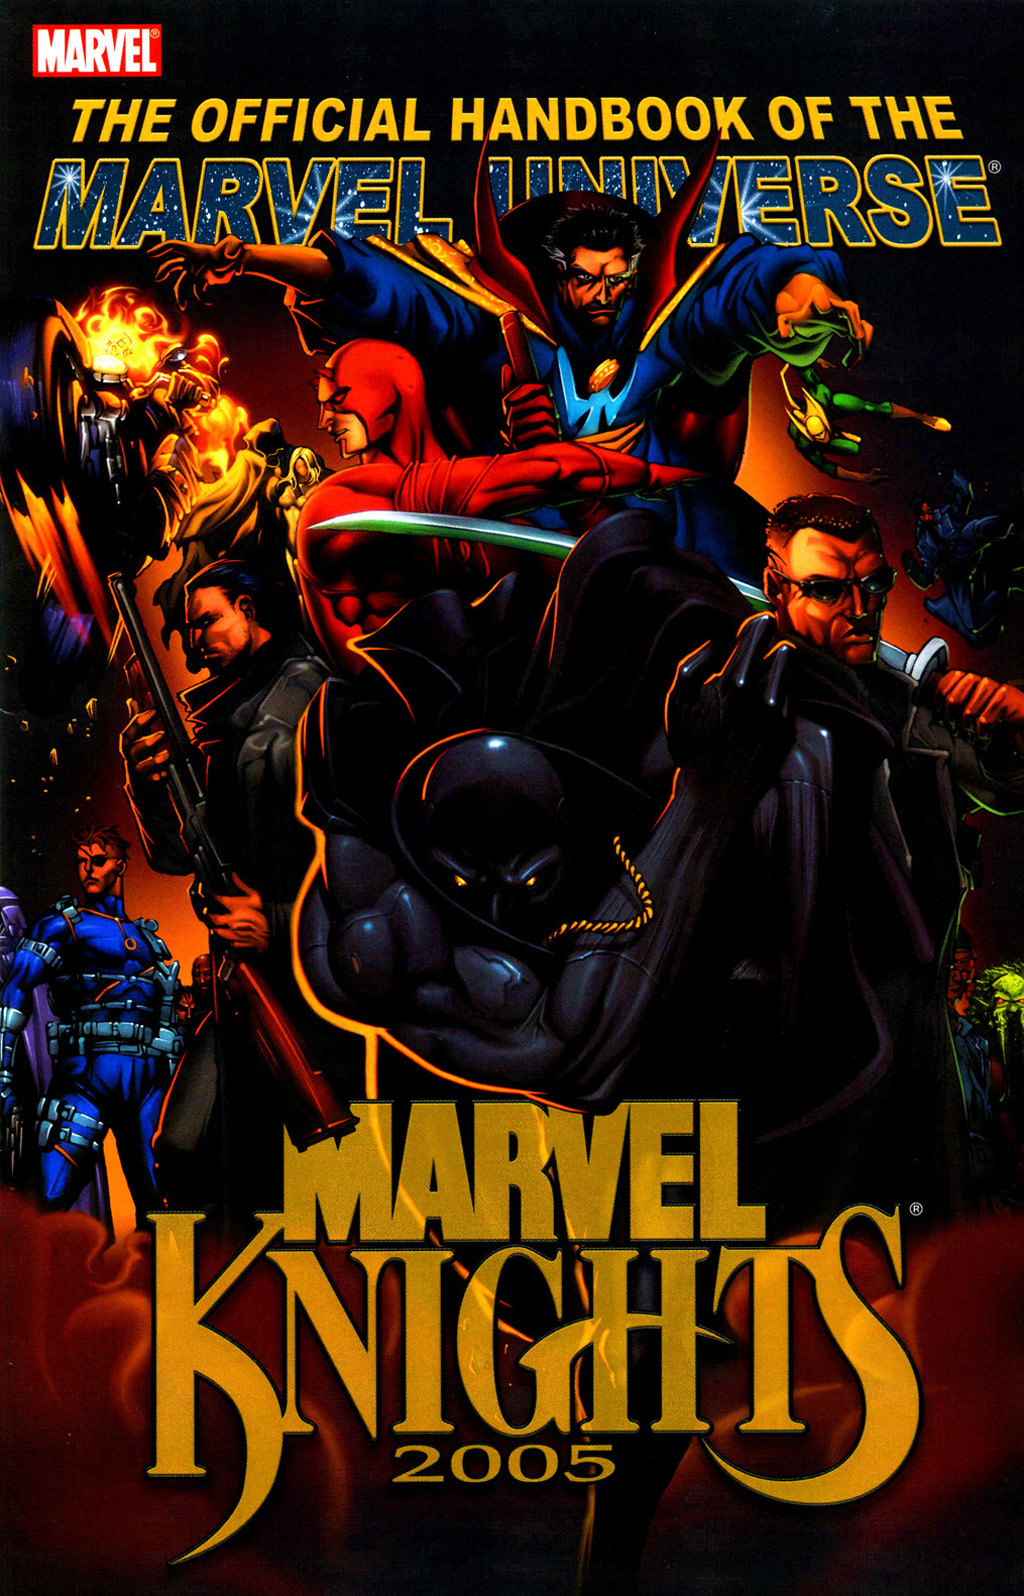 Read online The Official Handbook of the Marvel Universe: Marvel Knights comic -  Issue # Full - 1